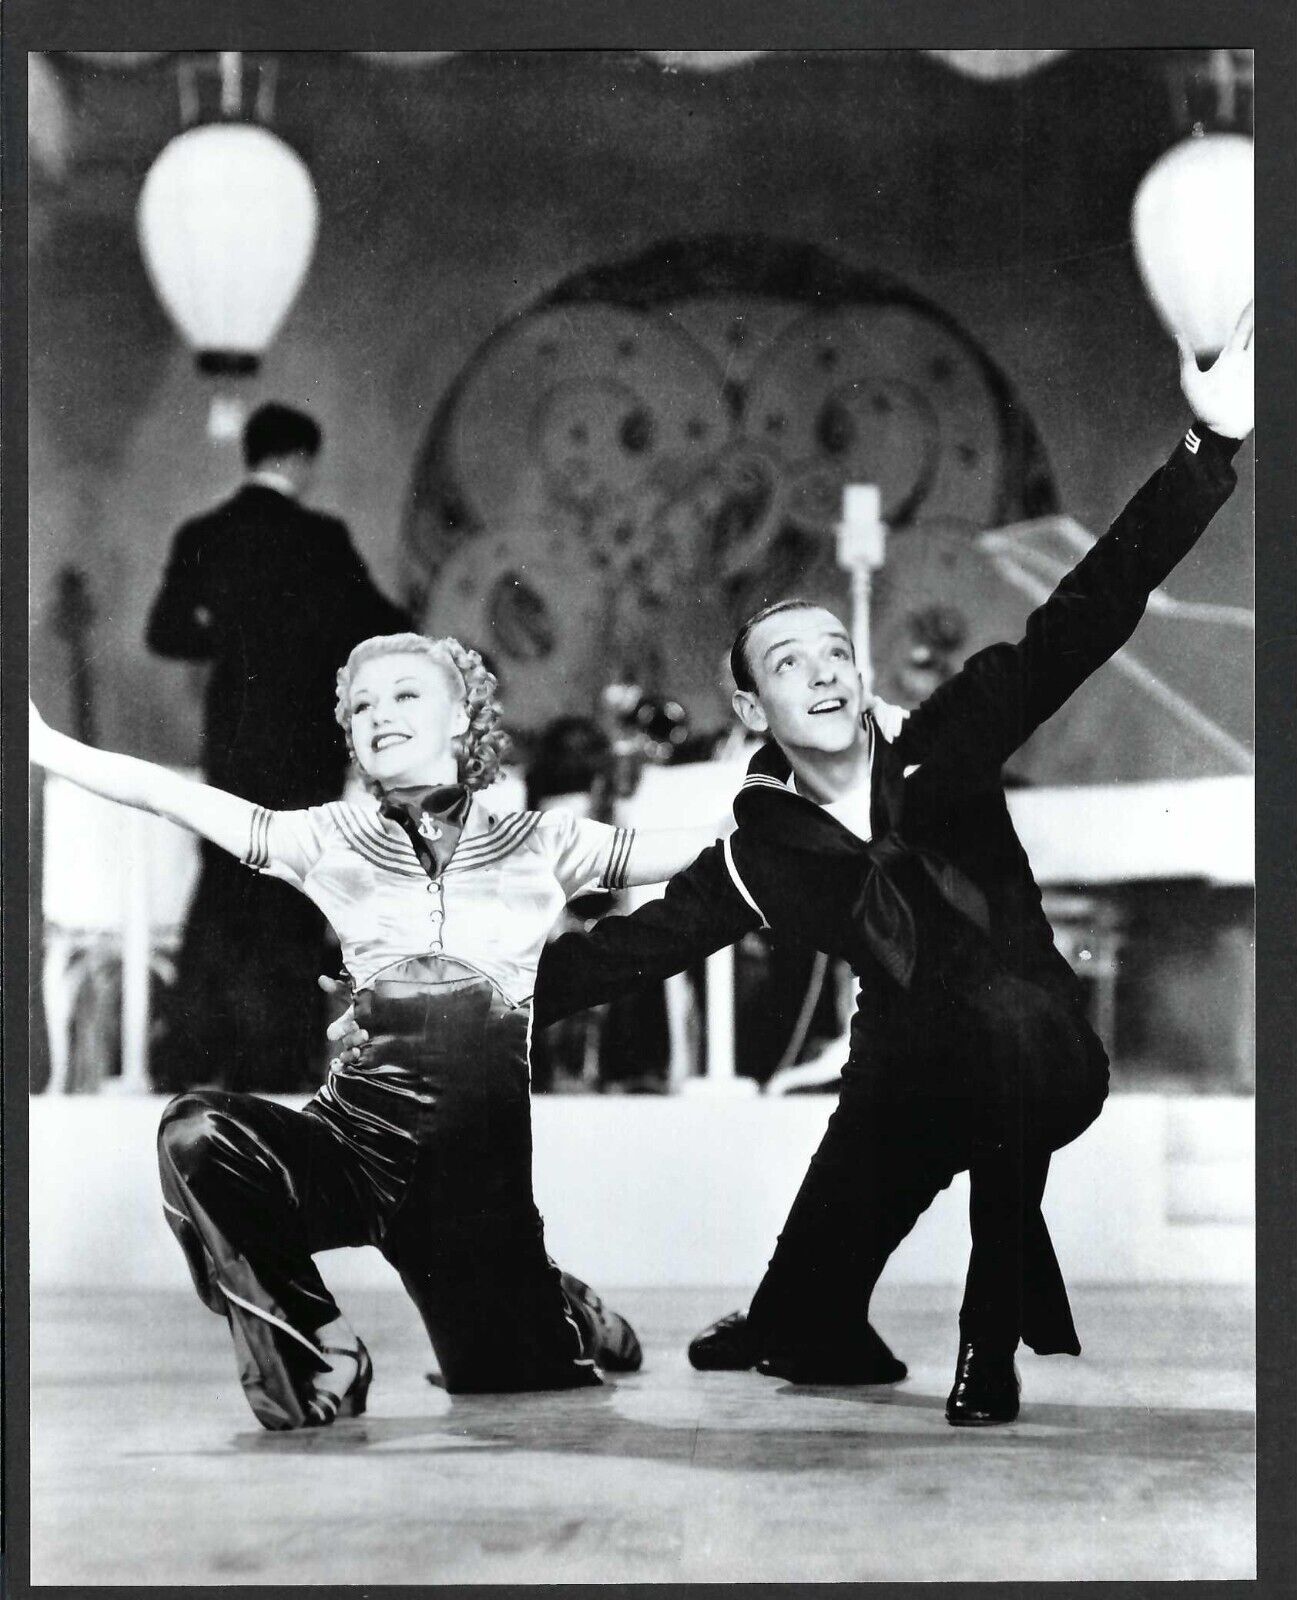 HOLLYWOOD FRED ASTAIRE + GINGER ROGERS AMAZING STUNNING PHOTO